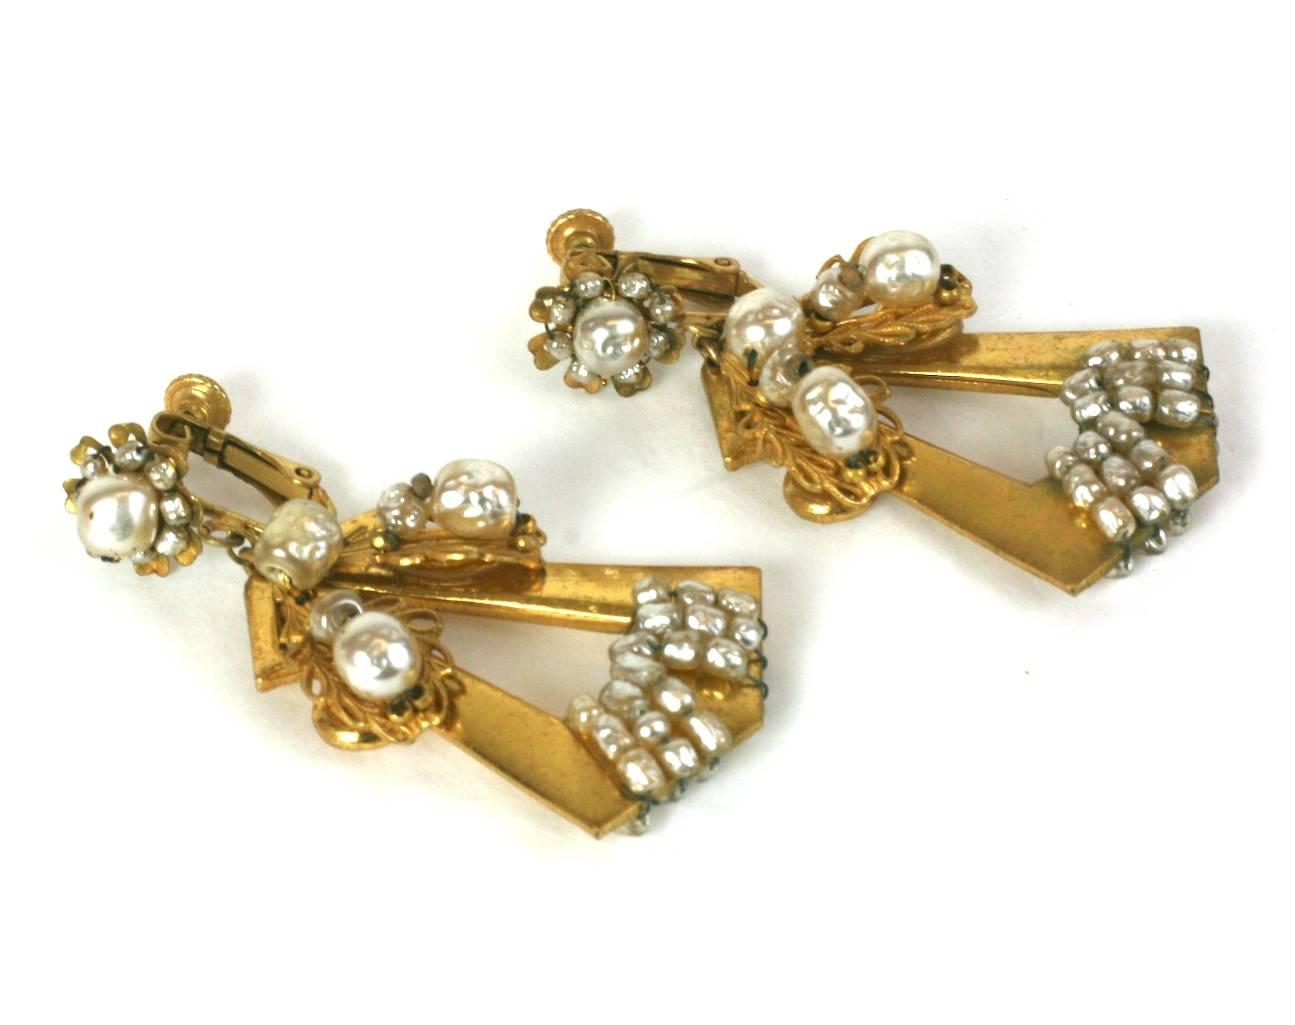 Miriam Haskell long Revivalist articulated earrings. Of Signature Russian Gilt, incorporating various sized faux baroque pearls and filigrees. Classic flower head motifs on ear clips. Clip back fittings. Excellent Condition. 1940's USA. Length 2.5